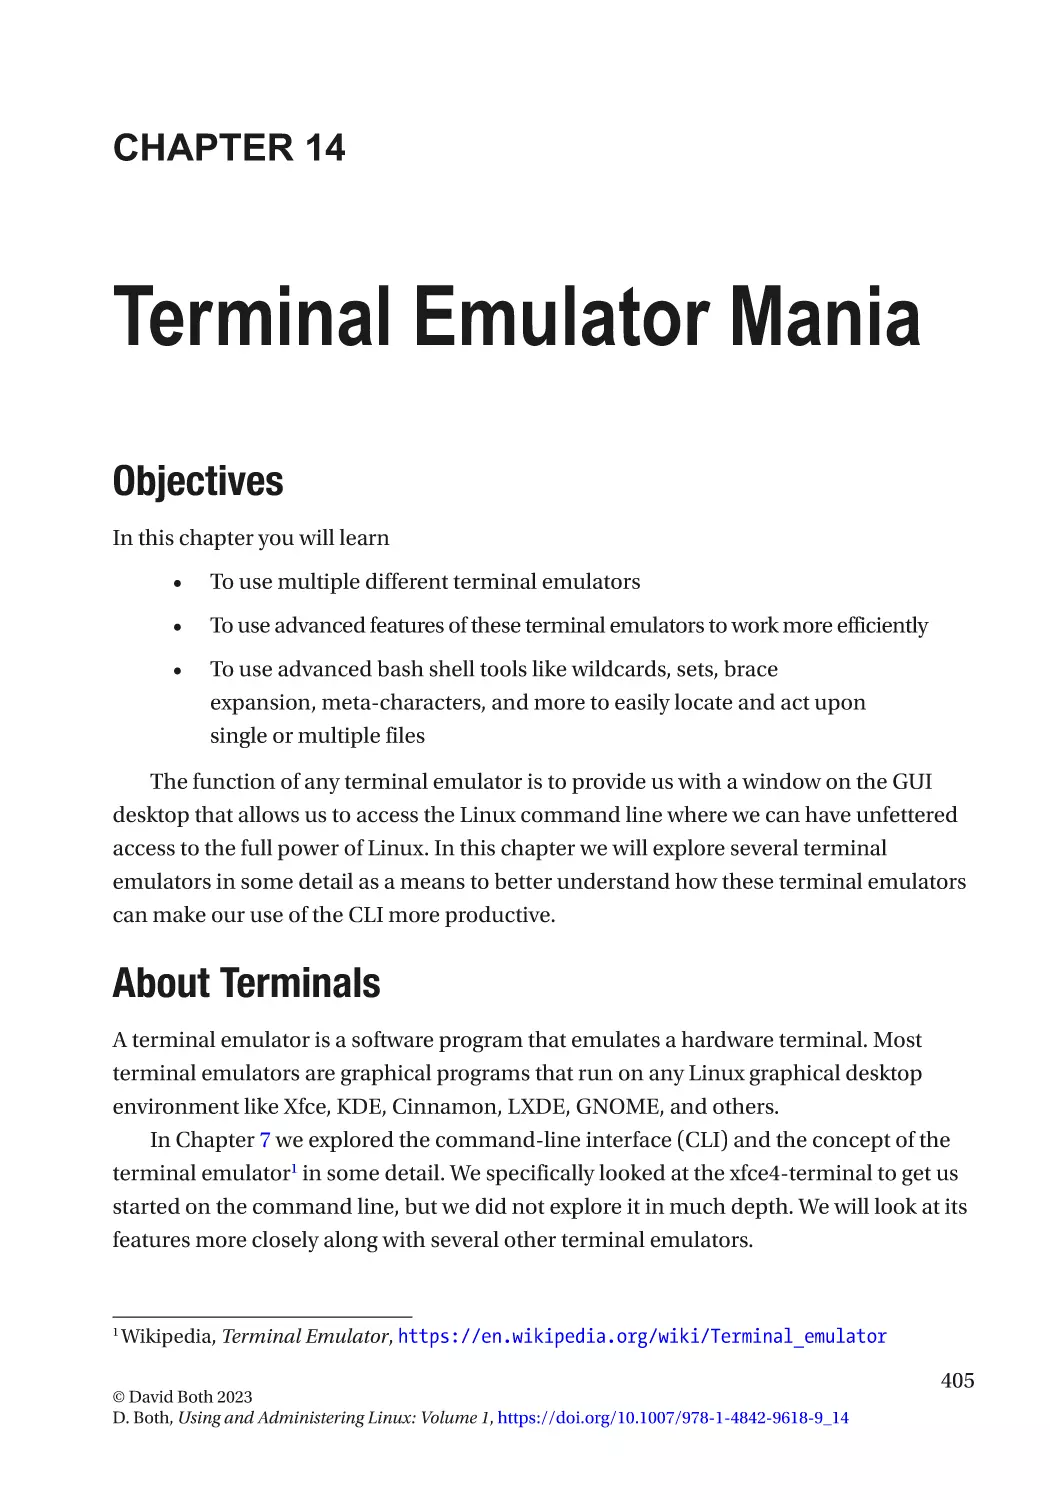 Chapter 14
Objectives
About Terminals